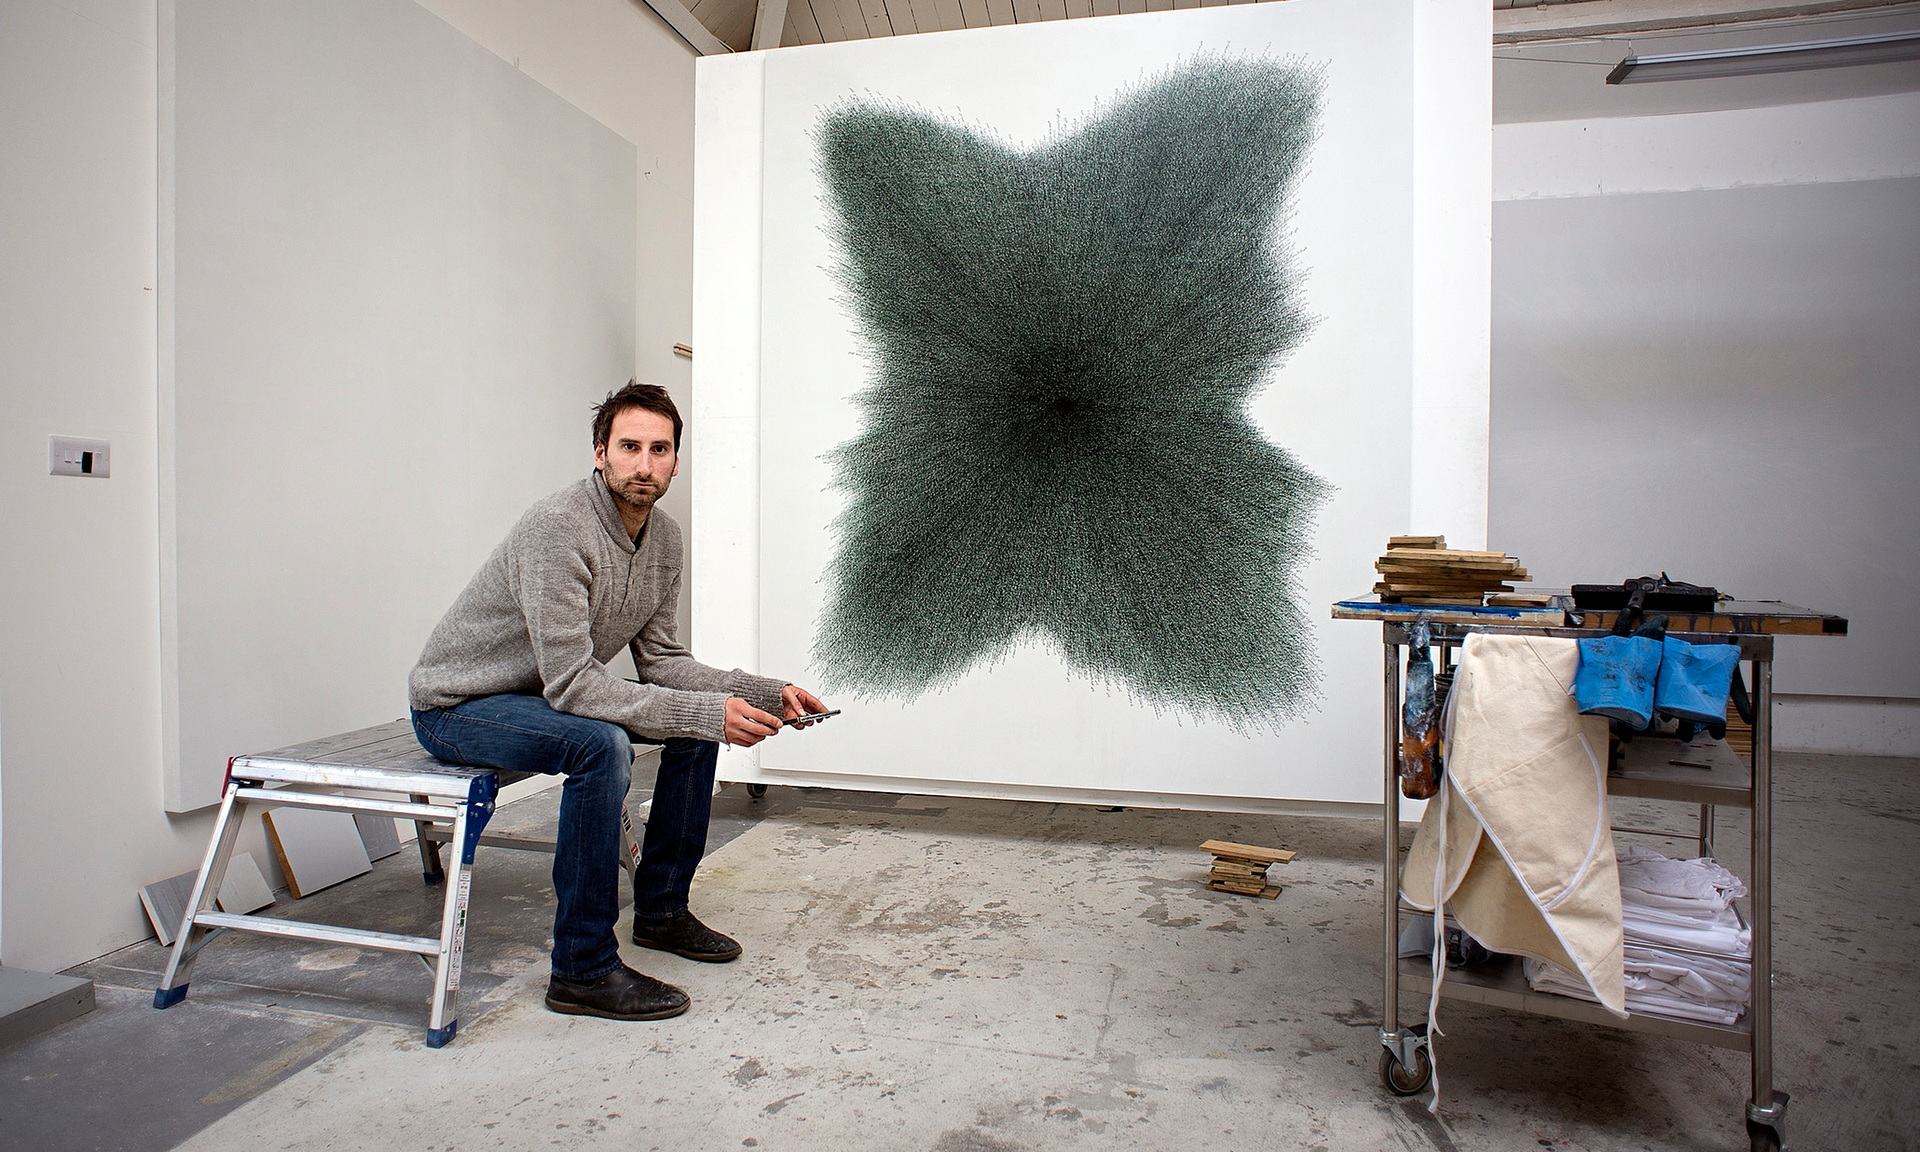 Idris Khan with his commissioned work for the U.S. Embassy Islamabad